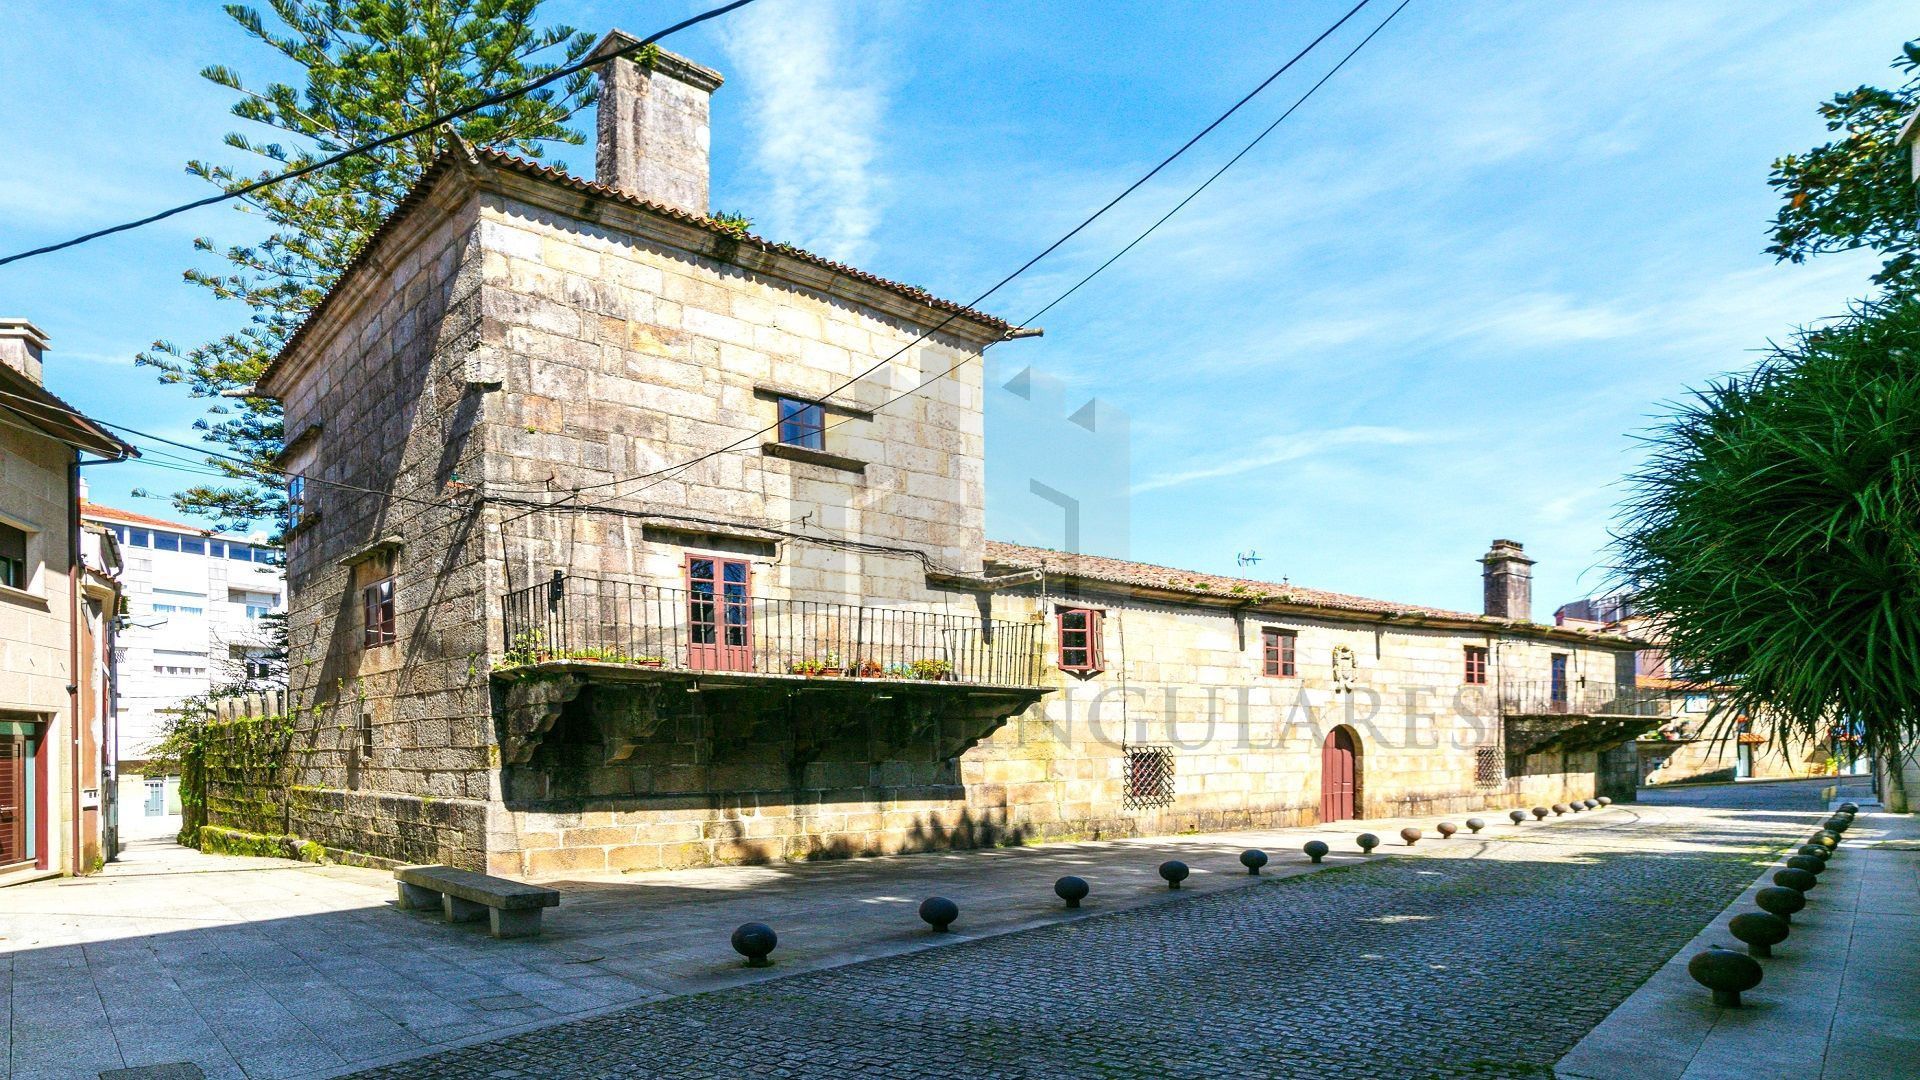 HISTORY OF THE URBAN PALACE IN THE COUNCIL OF AROUSA